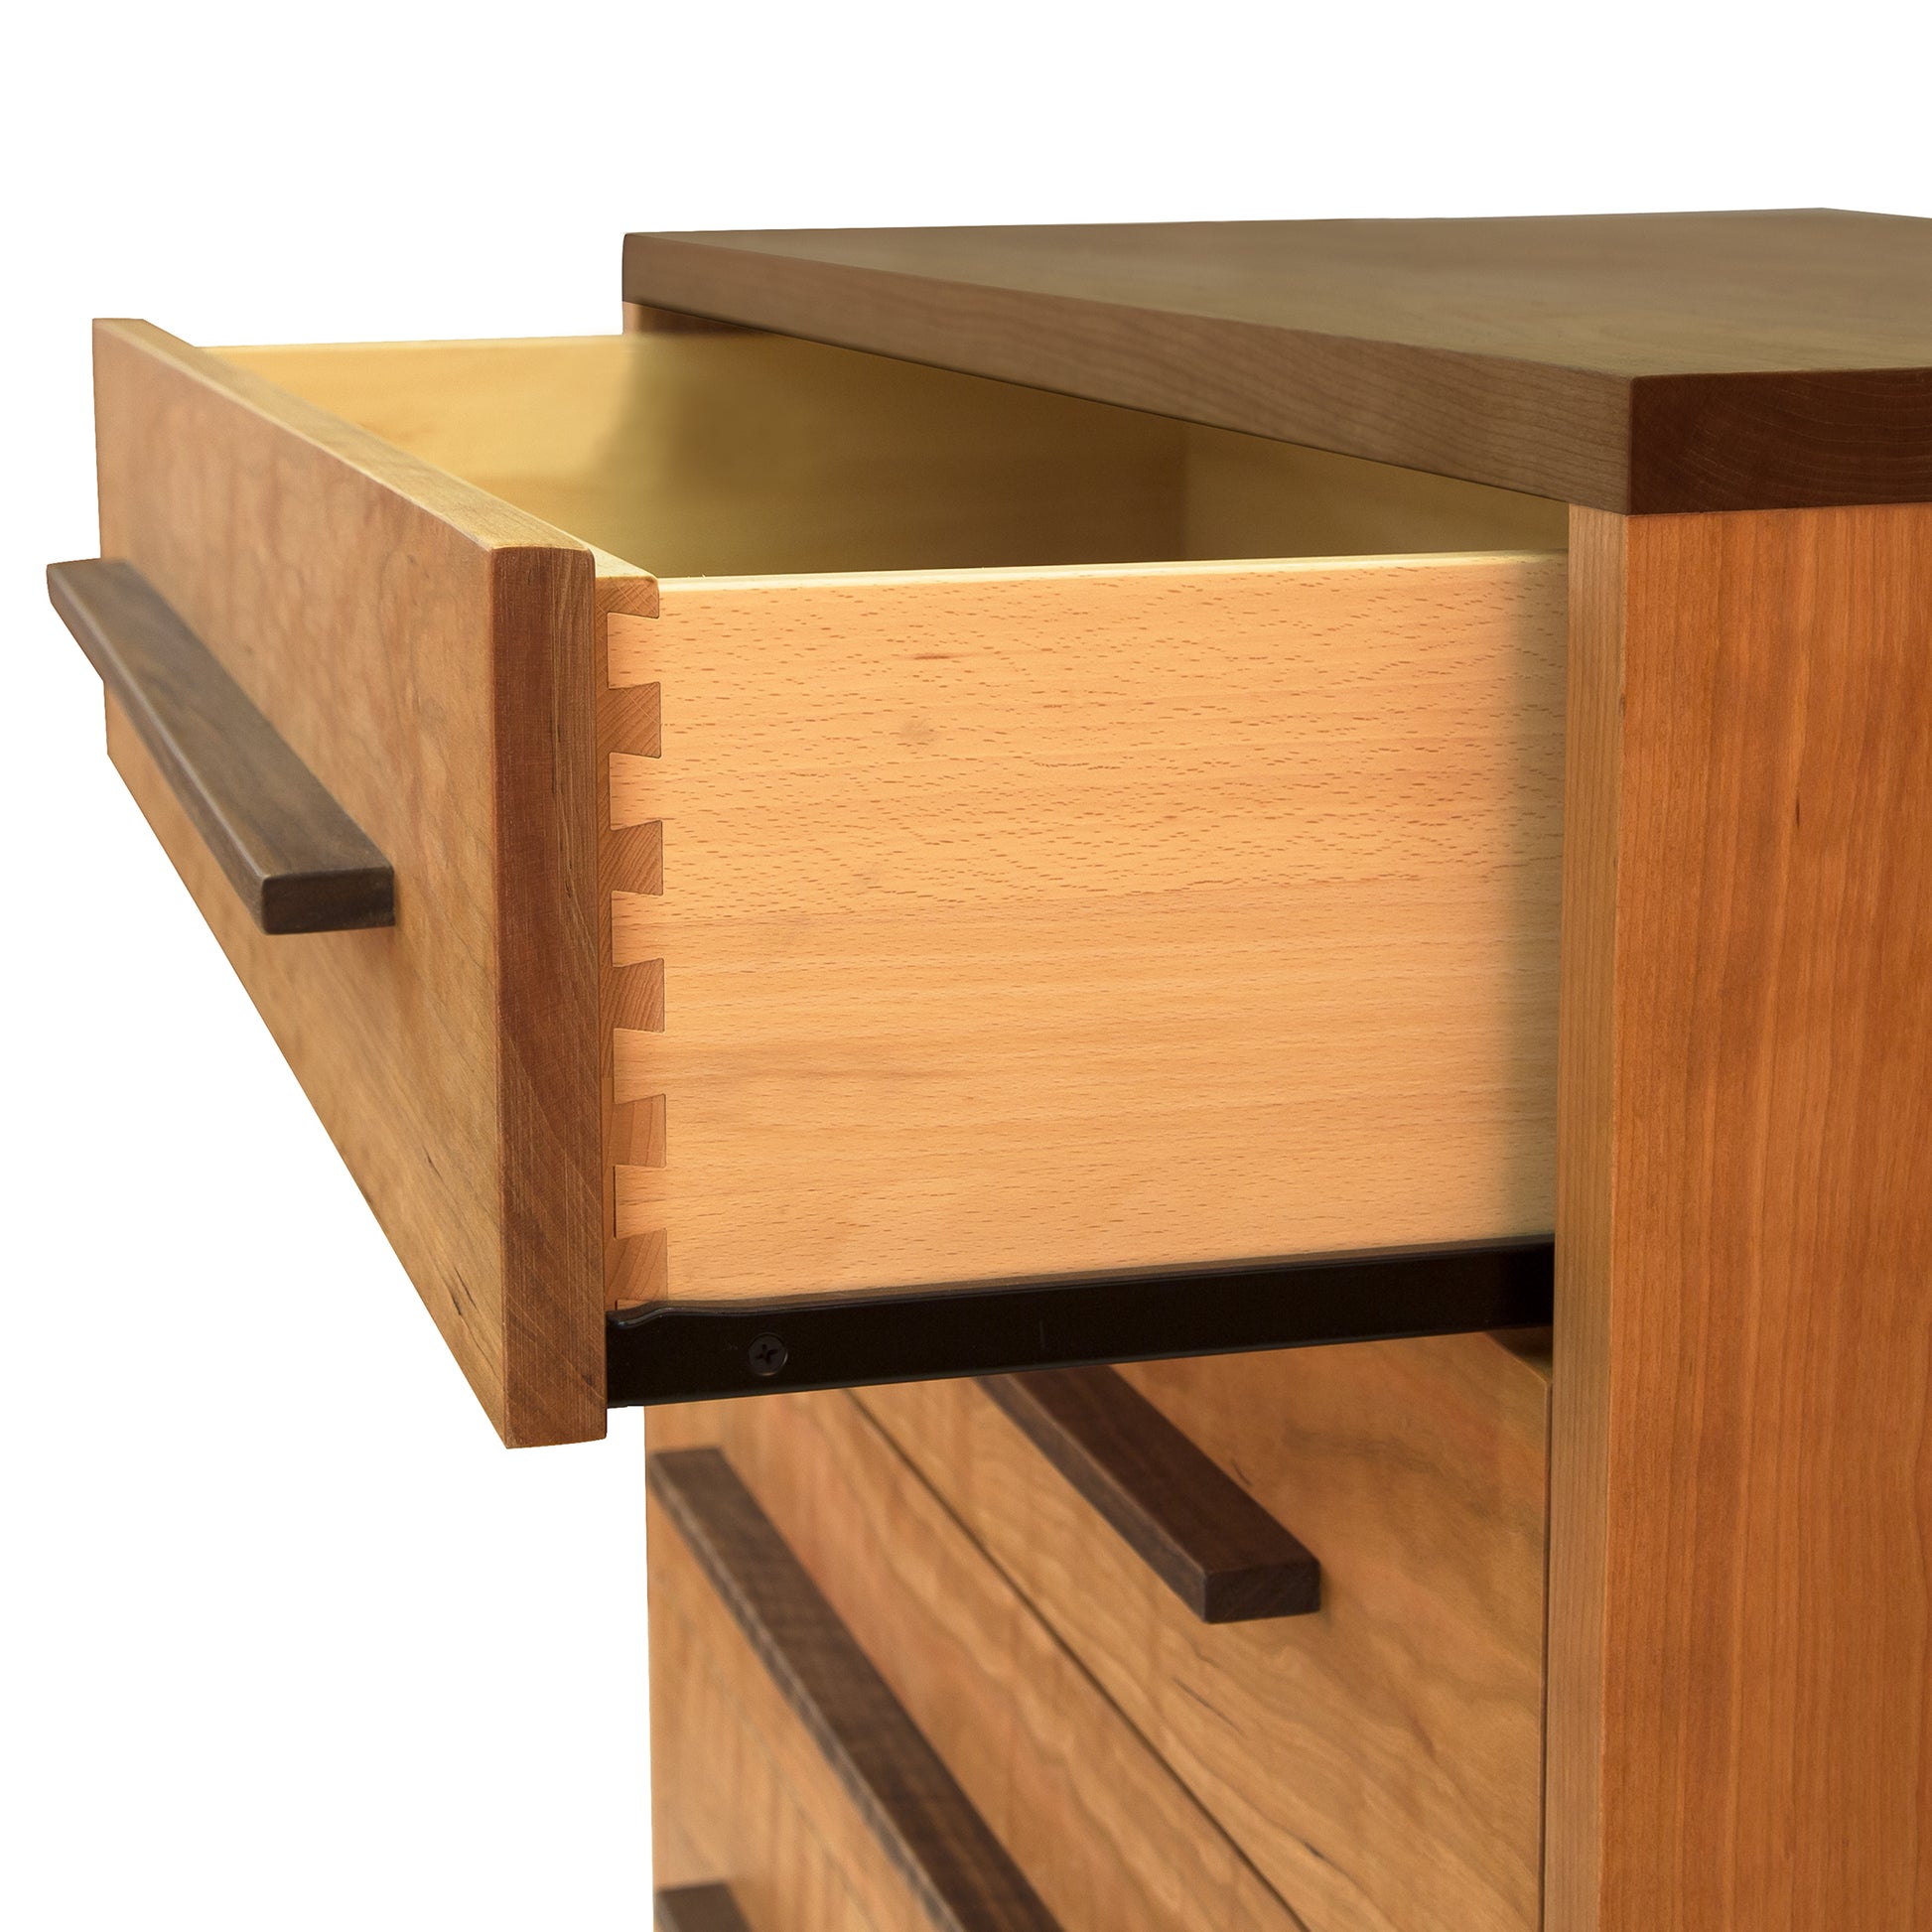 Close-up view of an open drawer in a Modern American 5-Drawer Chest from Vermont Furniture Designs showing detailed dovetail joints and an eco-friendly oil finish. The chest's rich grain patterns and robust construction are prominently displayed.